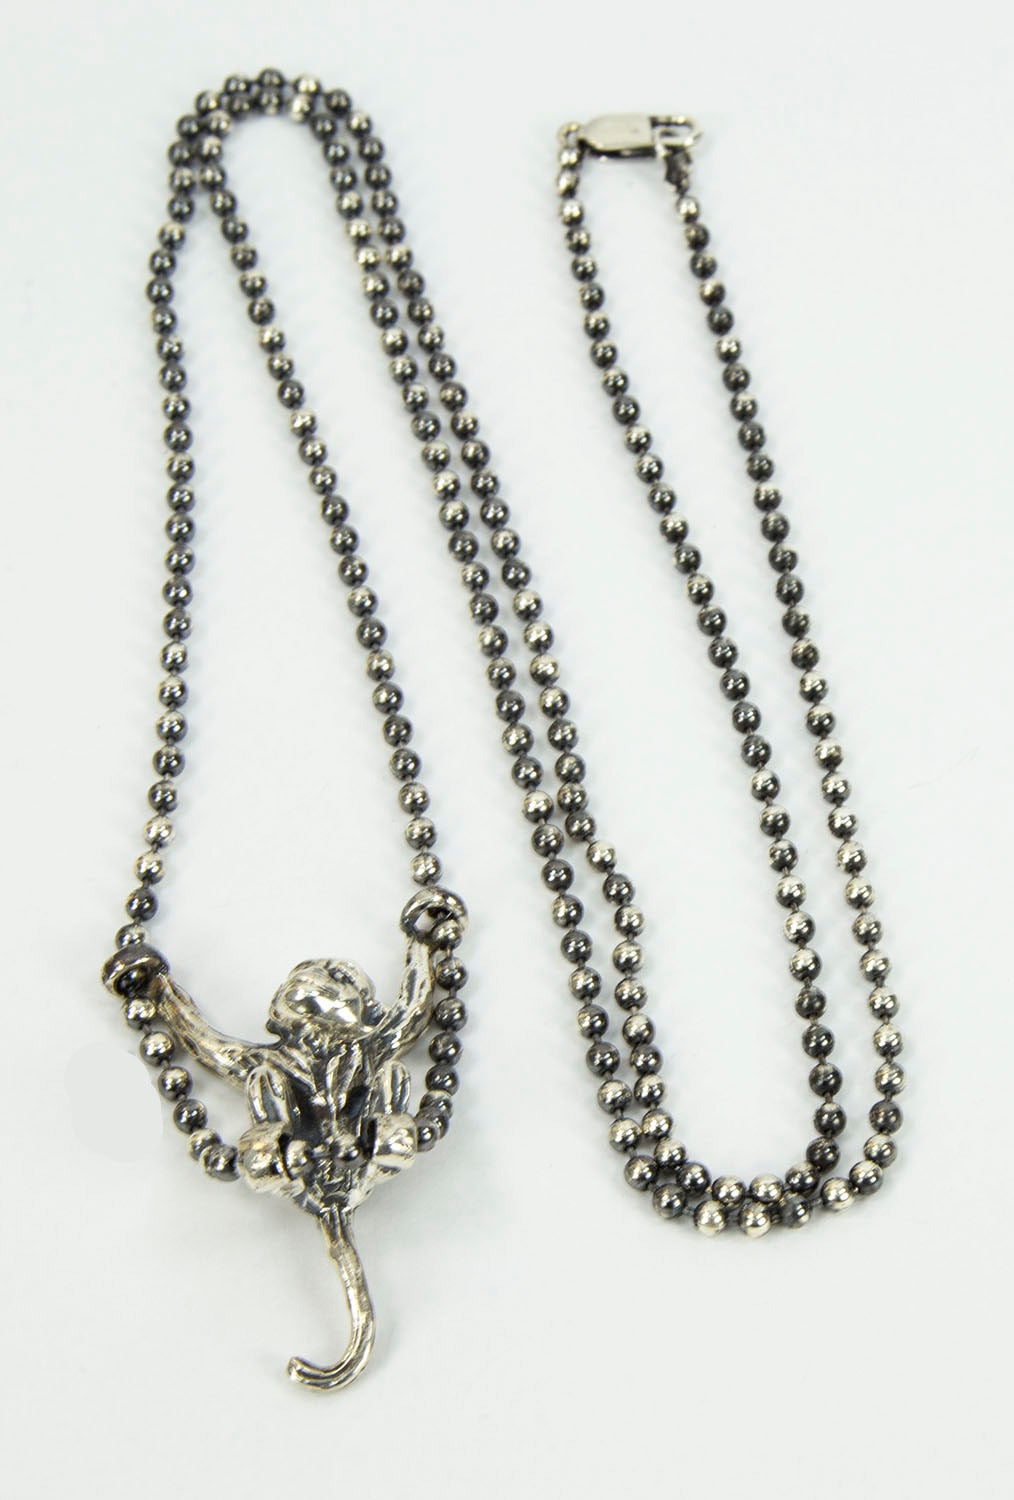 Adorable Monkey swinging on a long Ball Chain; all in oxidized solid sterling silver; measuring approx. 38” long; monkey measures approx. 2” long x 1.25” wide. For the Child in All of Us!